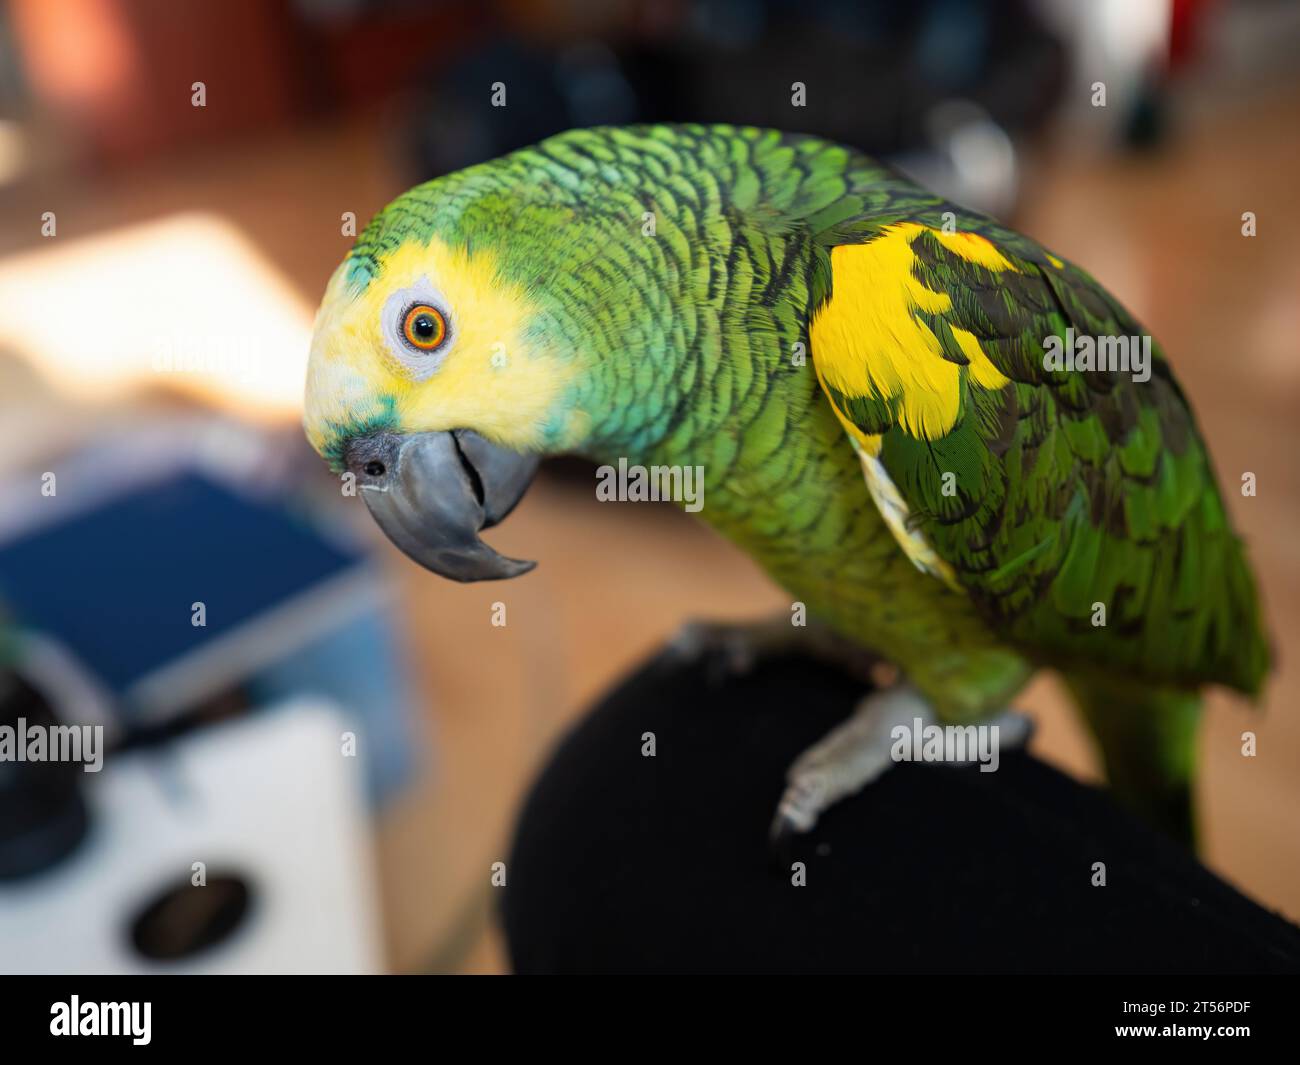 Turquoise-fronted amazon parrot (Amazona aestiva) enjoys free movement around the apartment. Cute green friendly pet bird sitting on knee of its owner Stock Photo